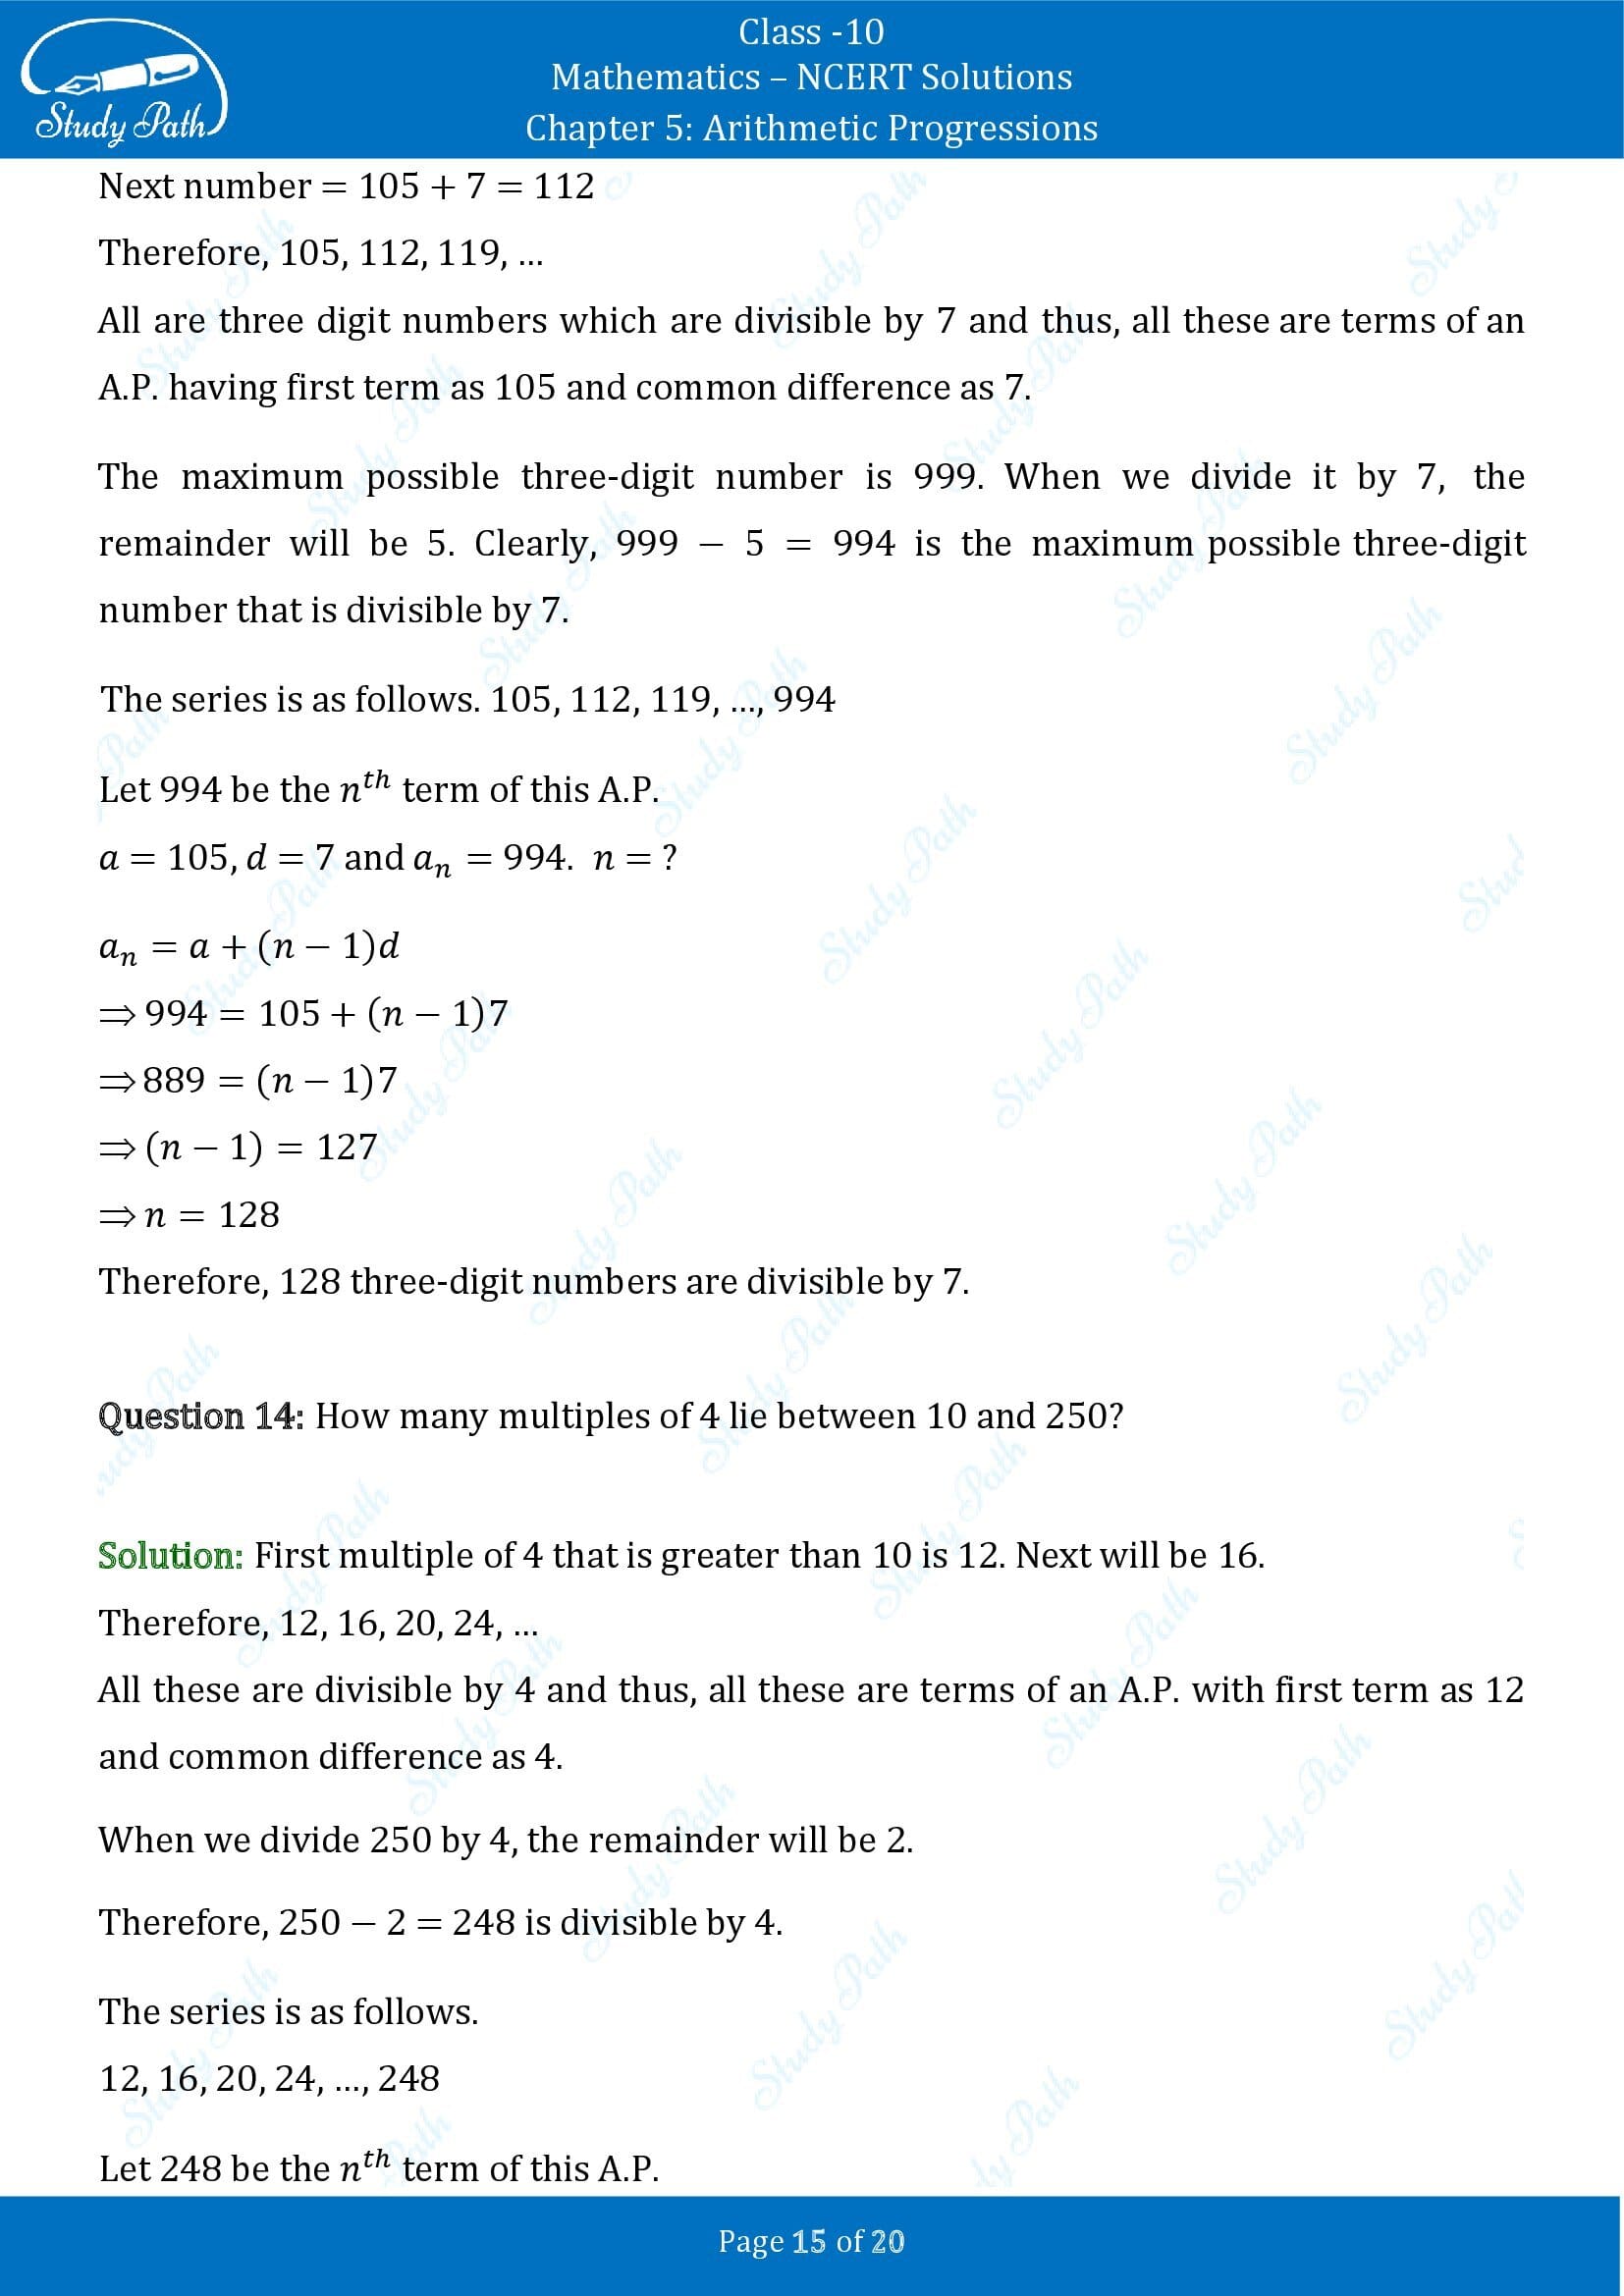 NCERT Solutions for Class 10 Maths Chapter 5 Arithmetic Progressions Exercise 5.2 00015